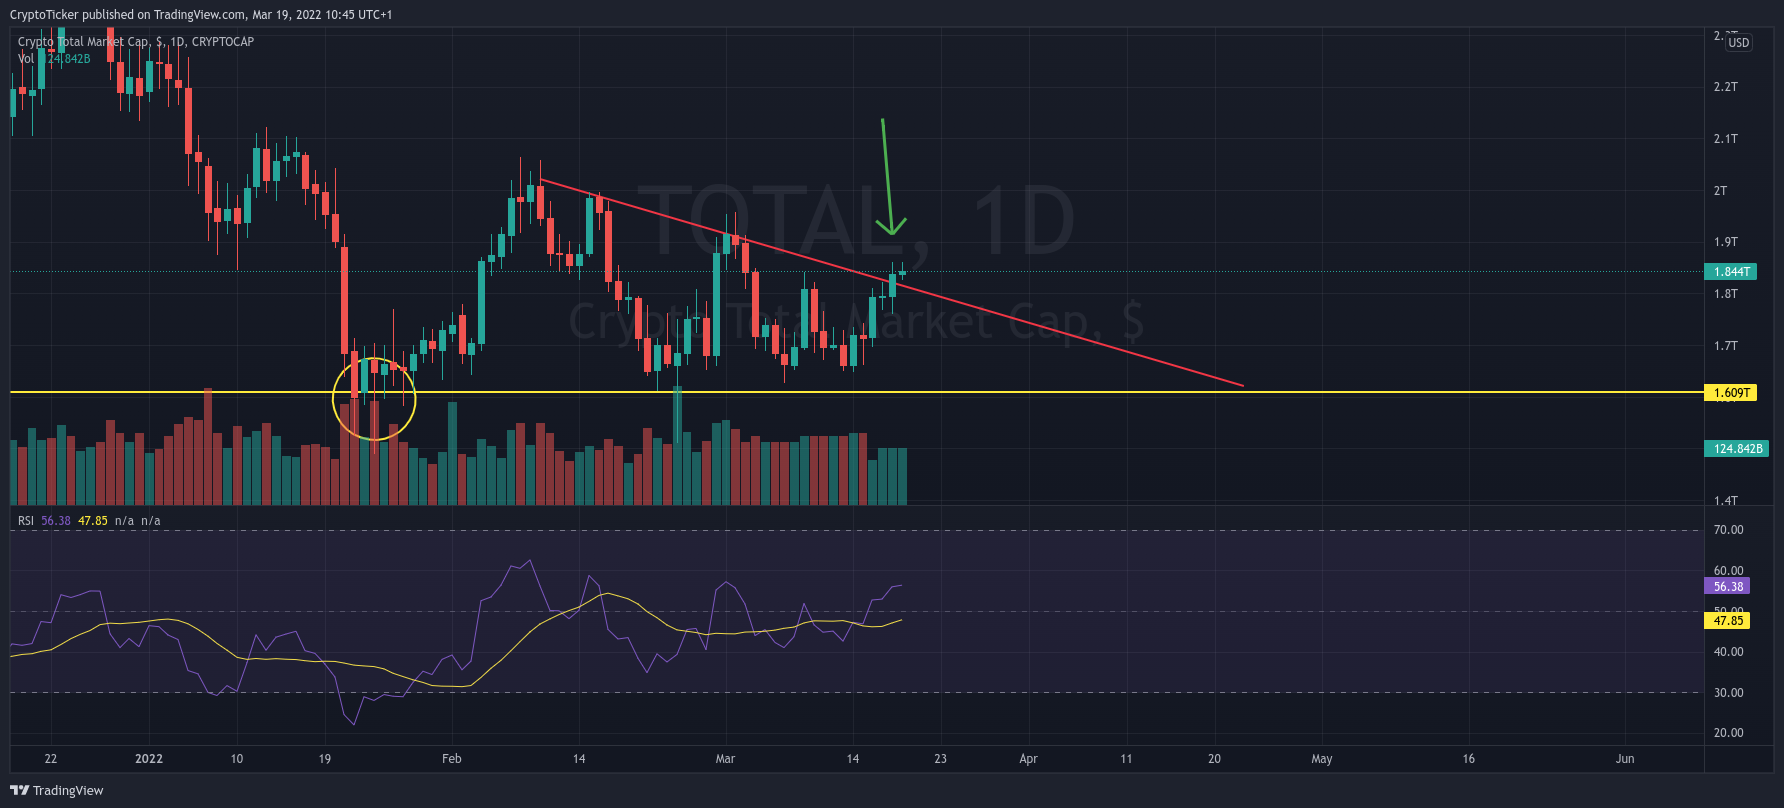 Crypto market up: Total Crypto Cap in USD 1-day chart showing the break in the downward triangle